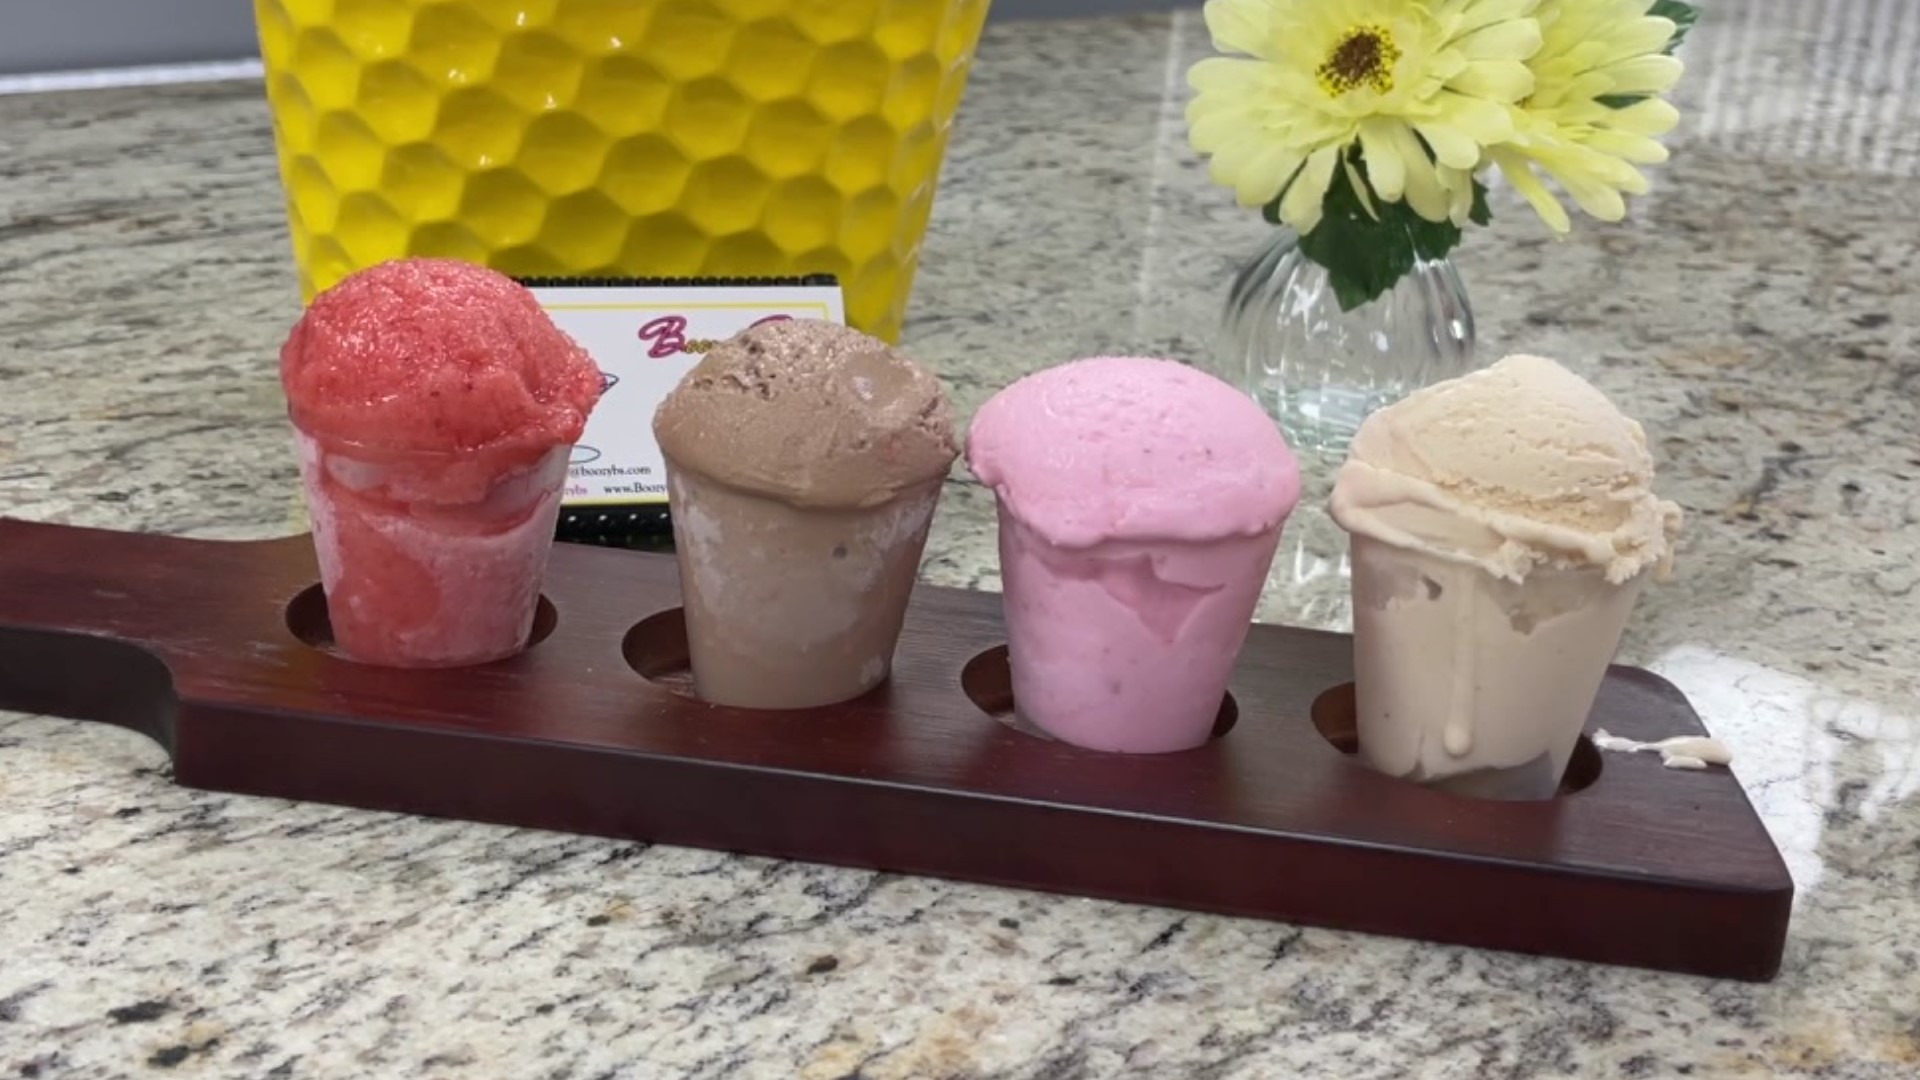 Boozy B's is adding a second location in downtown Scranton. The business offers ice cream with a kick